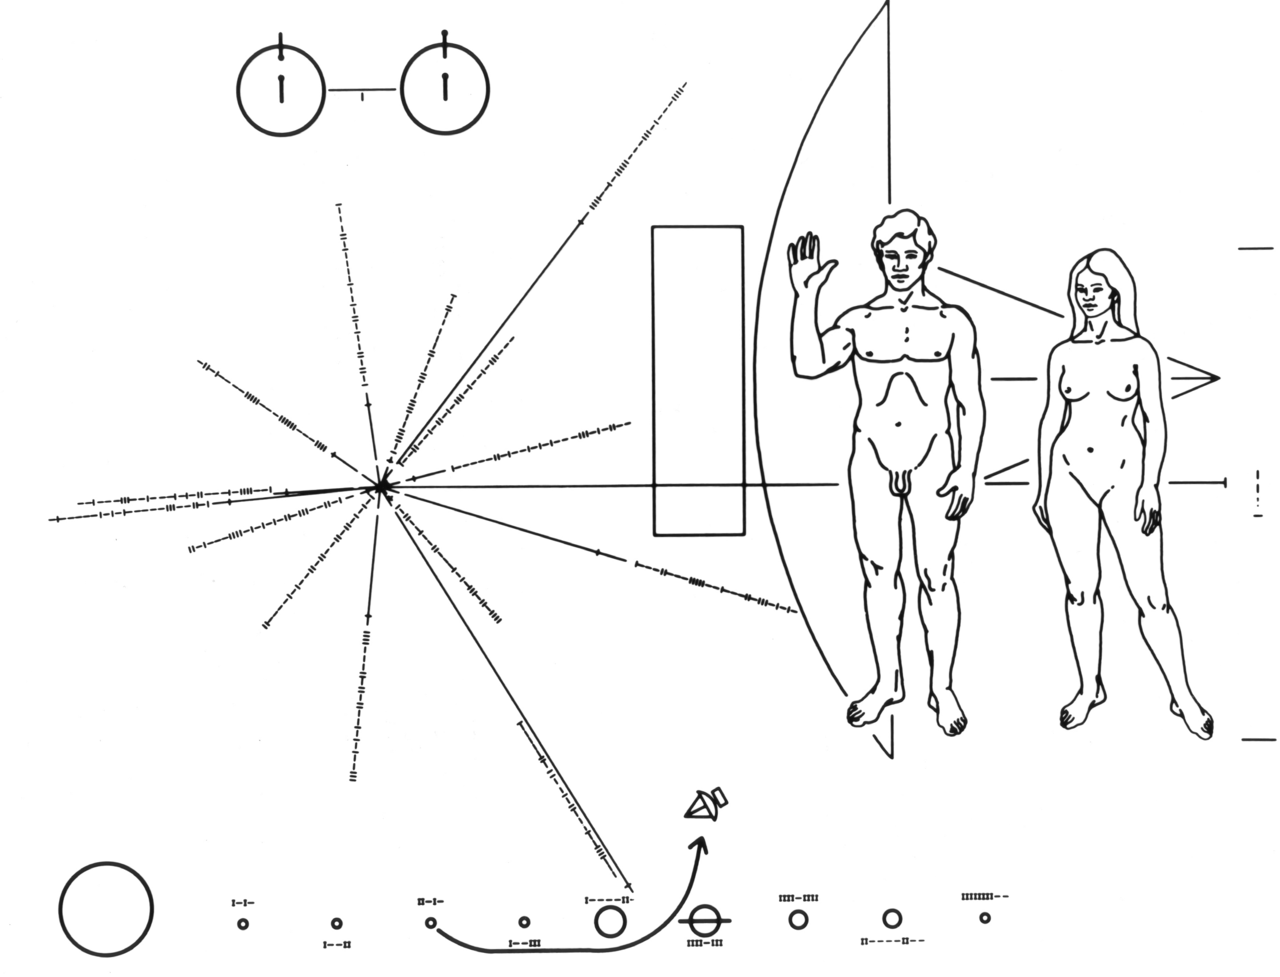 Black and white line drawing showing a naked idealized European man and woman standing in front of various geometric diagrams.